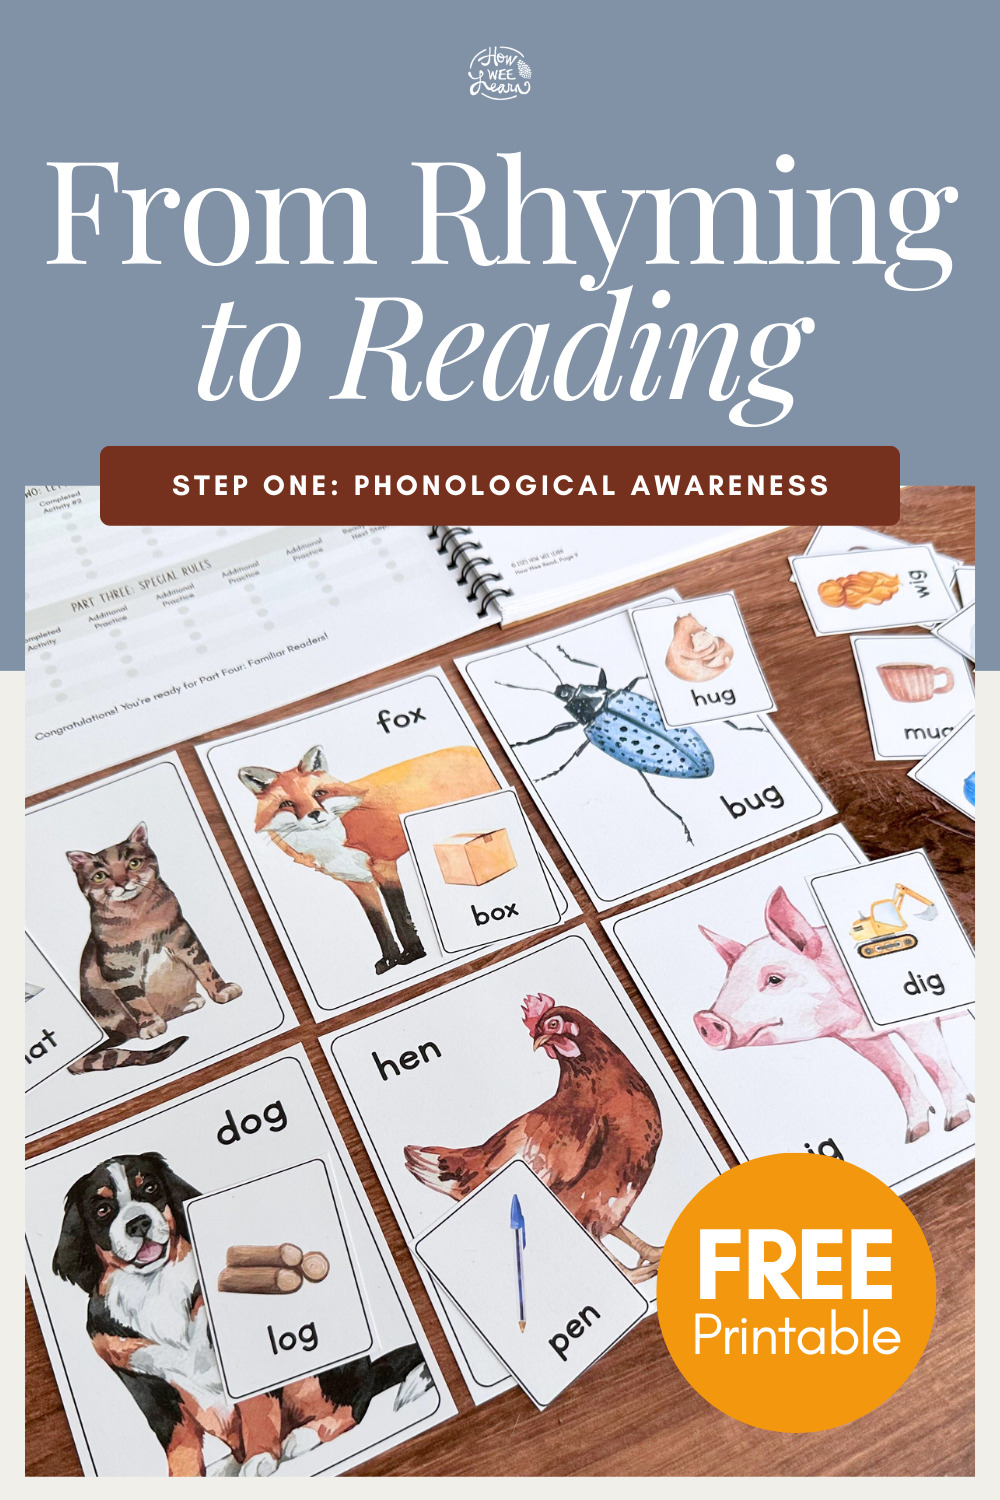 From Rhyming to Reading. Step One: Phonological Awareness. Free Printable!